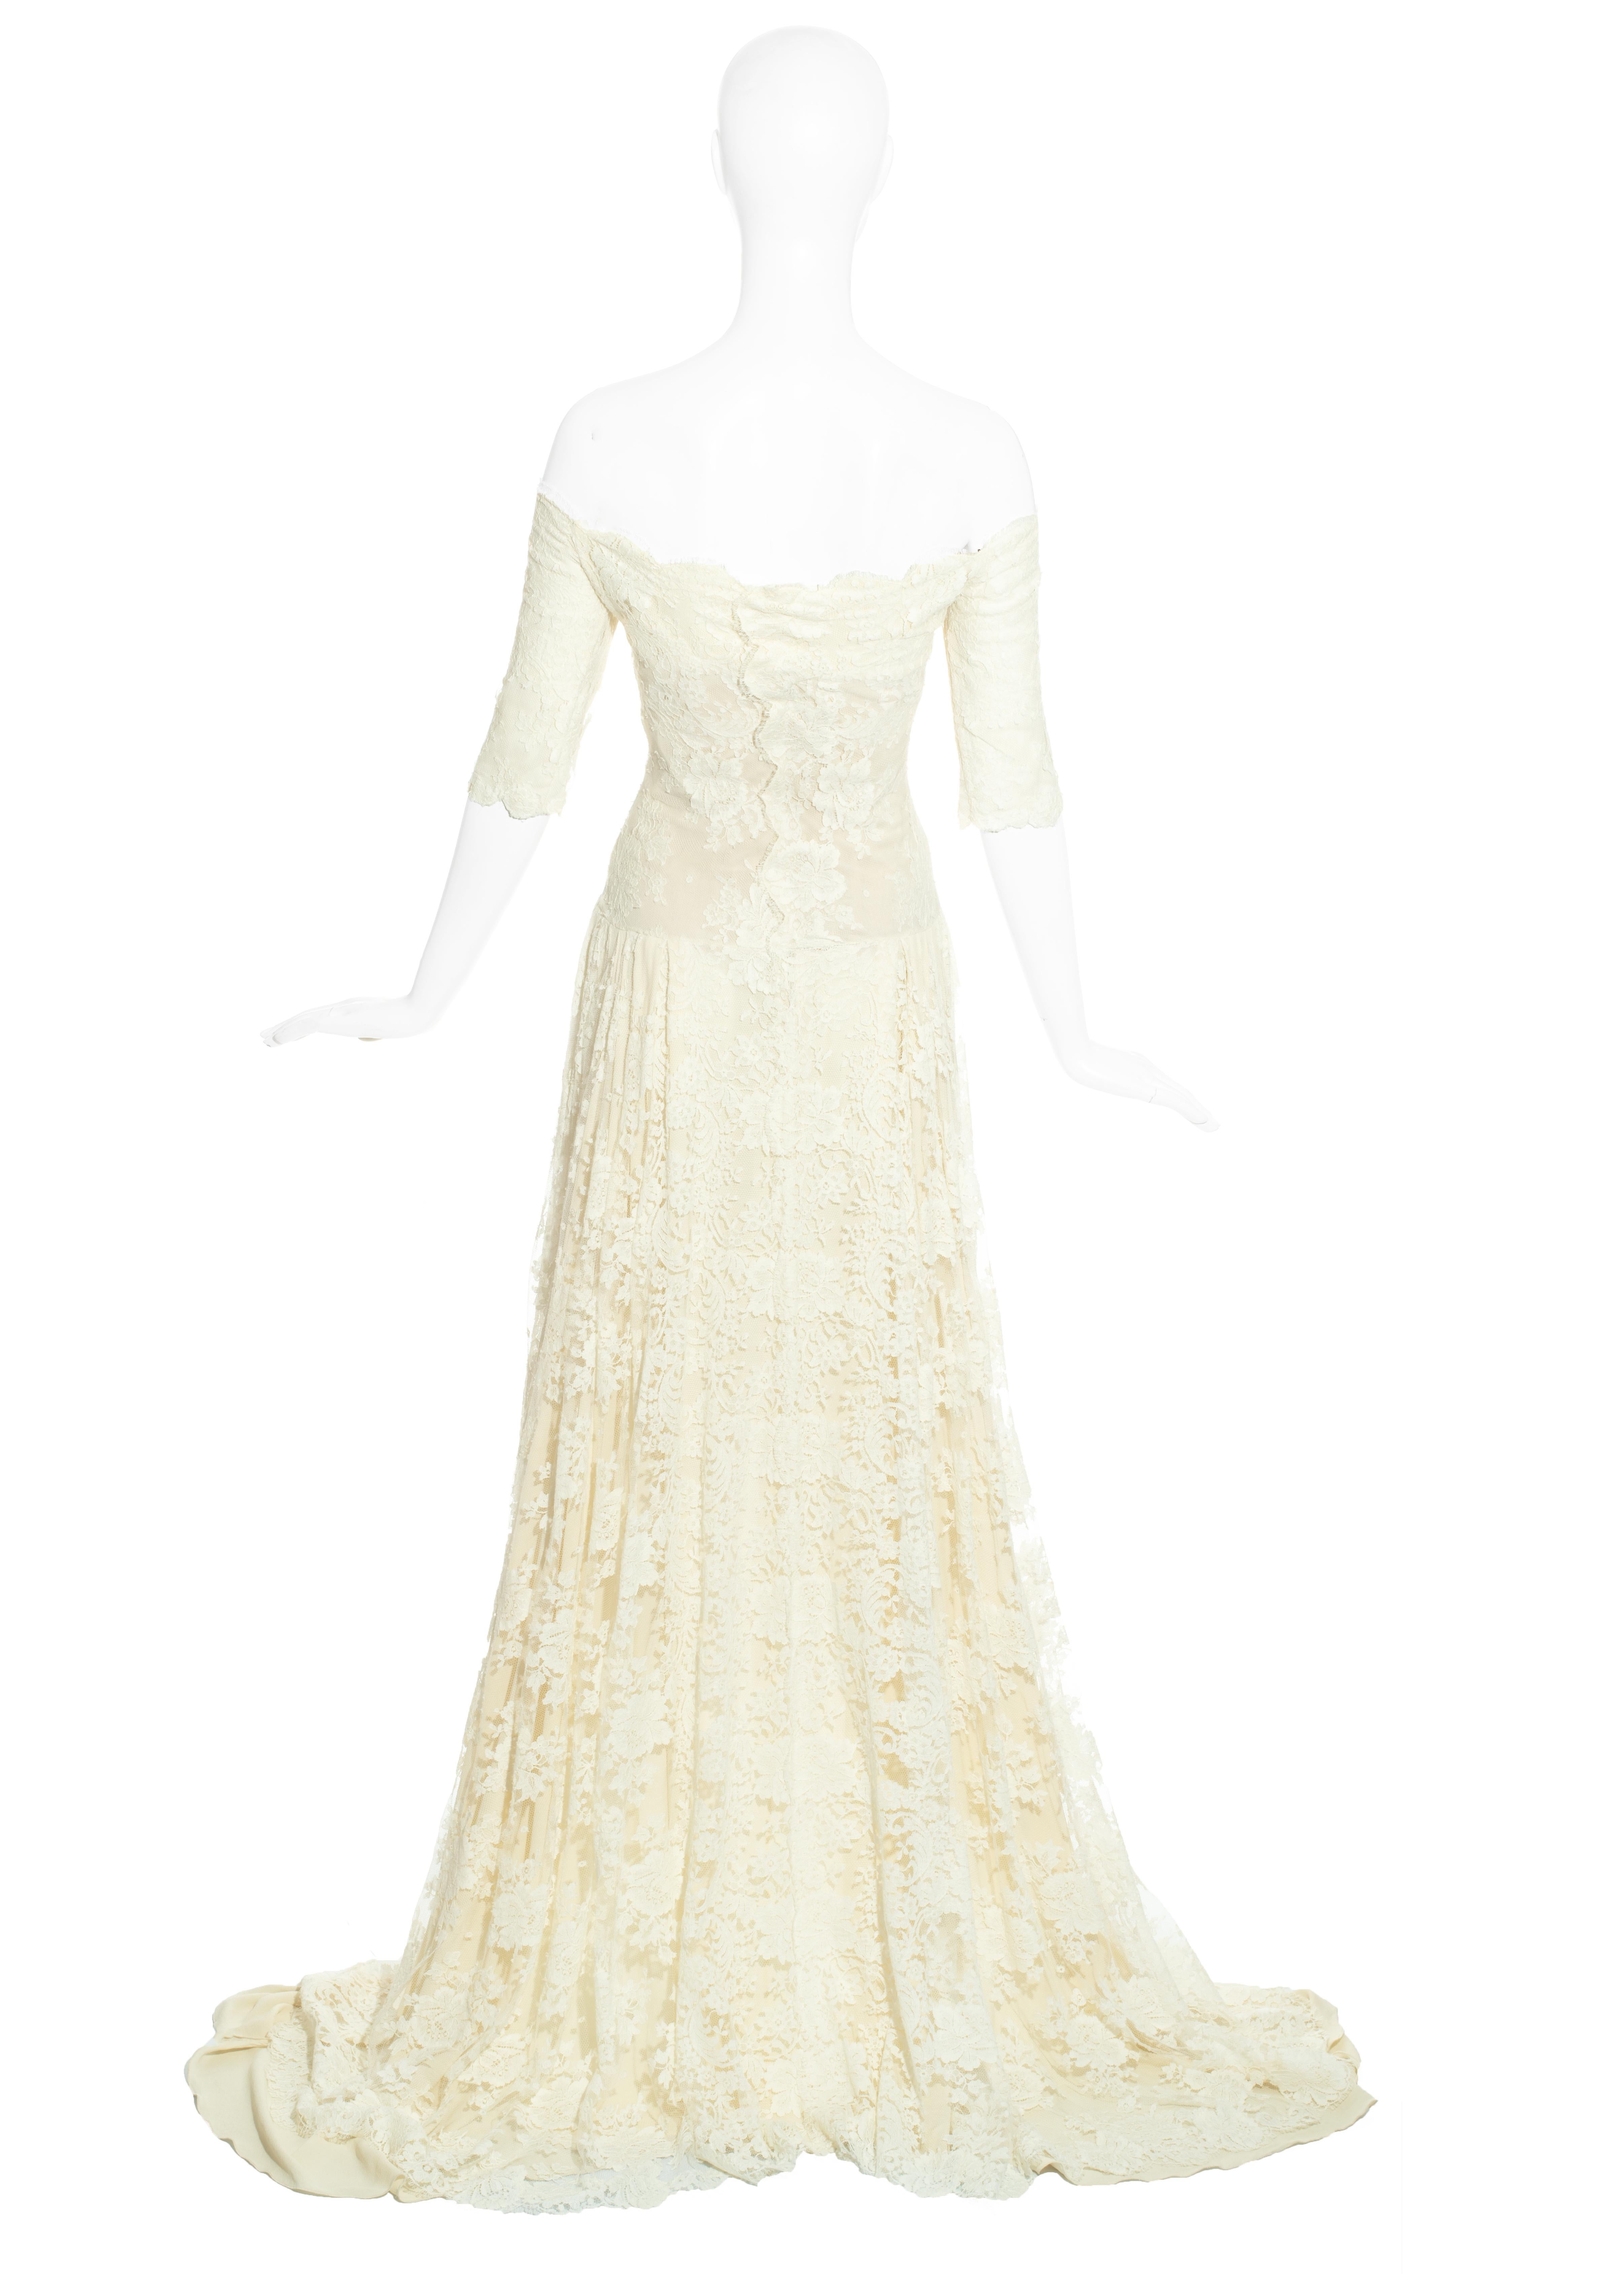 Alexander McQueen ivory lace corseted trained evening dress, 'Sarabande' ss 2007 2